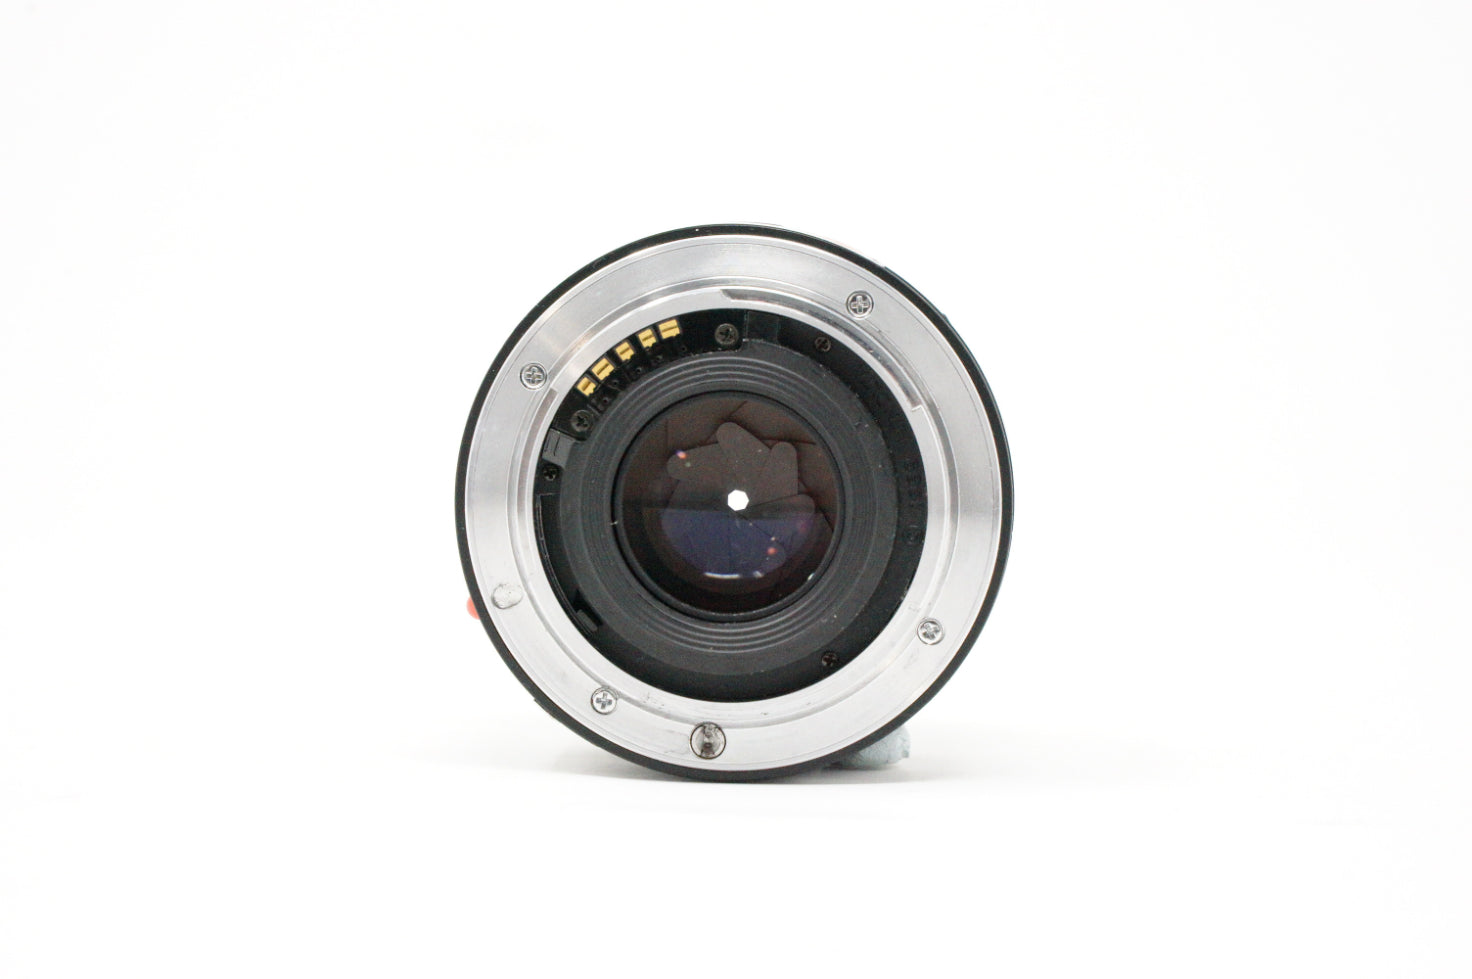 Used Minolta AF 50mm F1.7 lens in Sony A mount